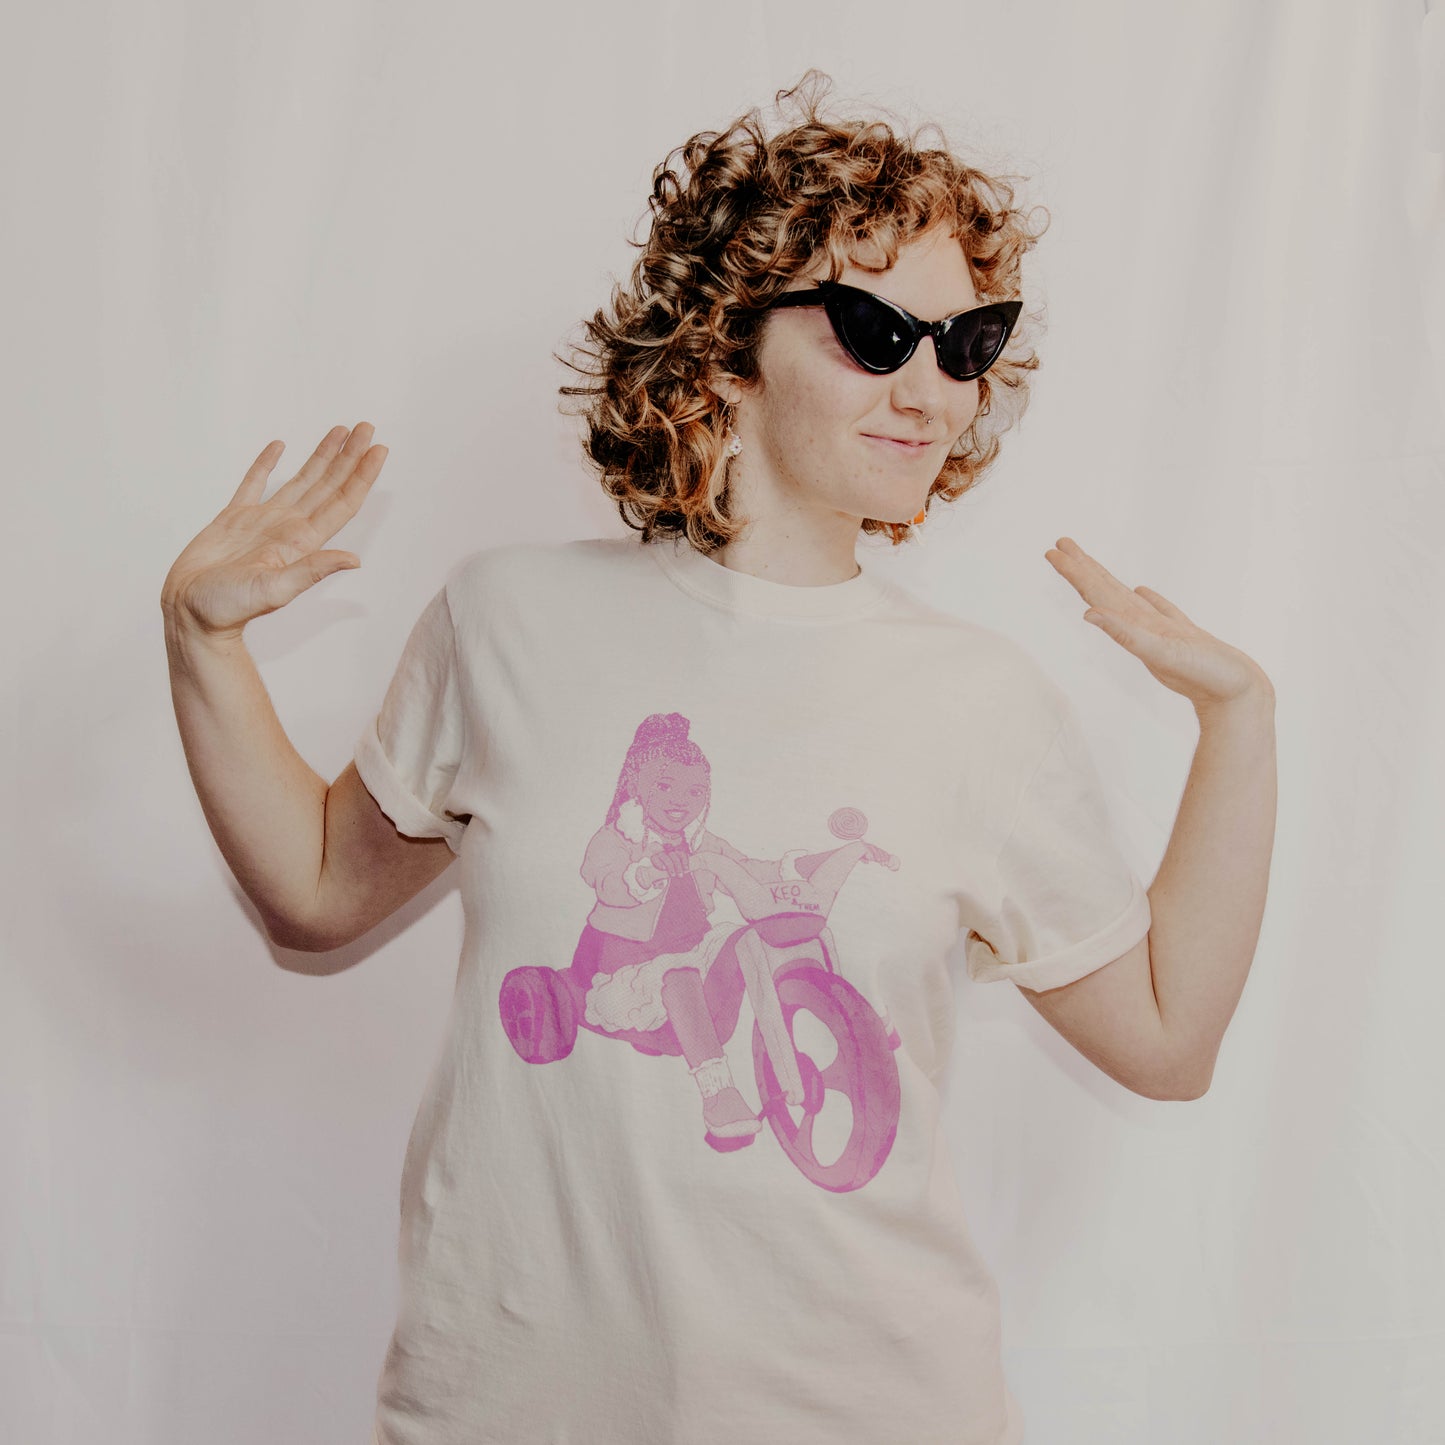 Money Grooves - Tricycle T-Shirt - Beige w/ Pink